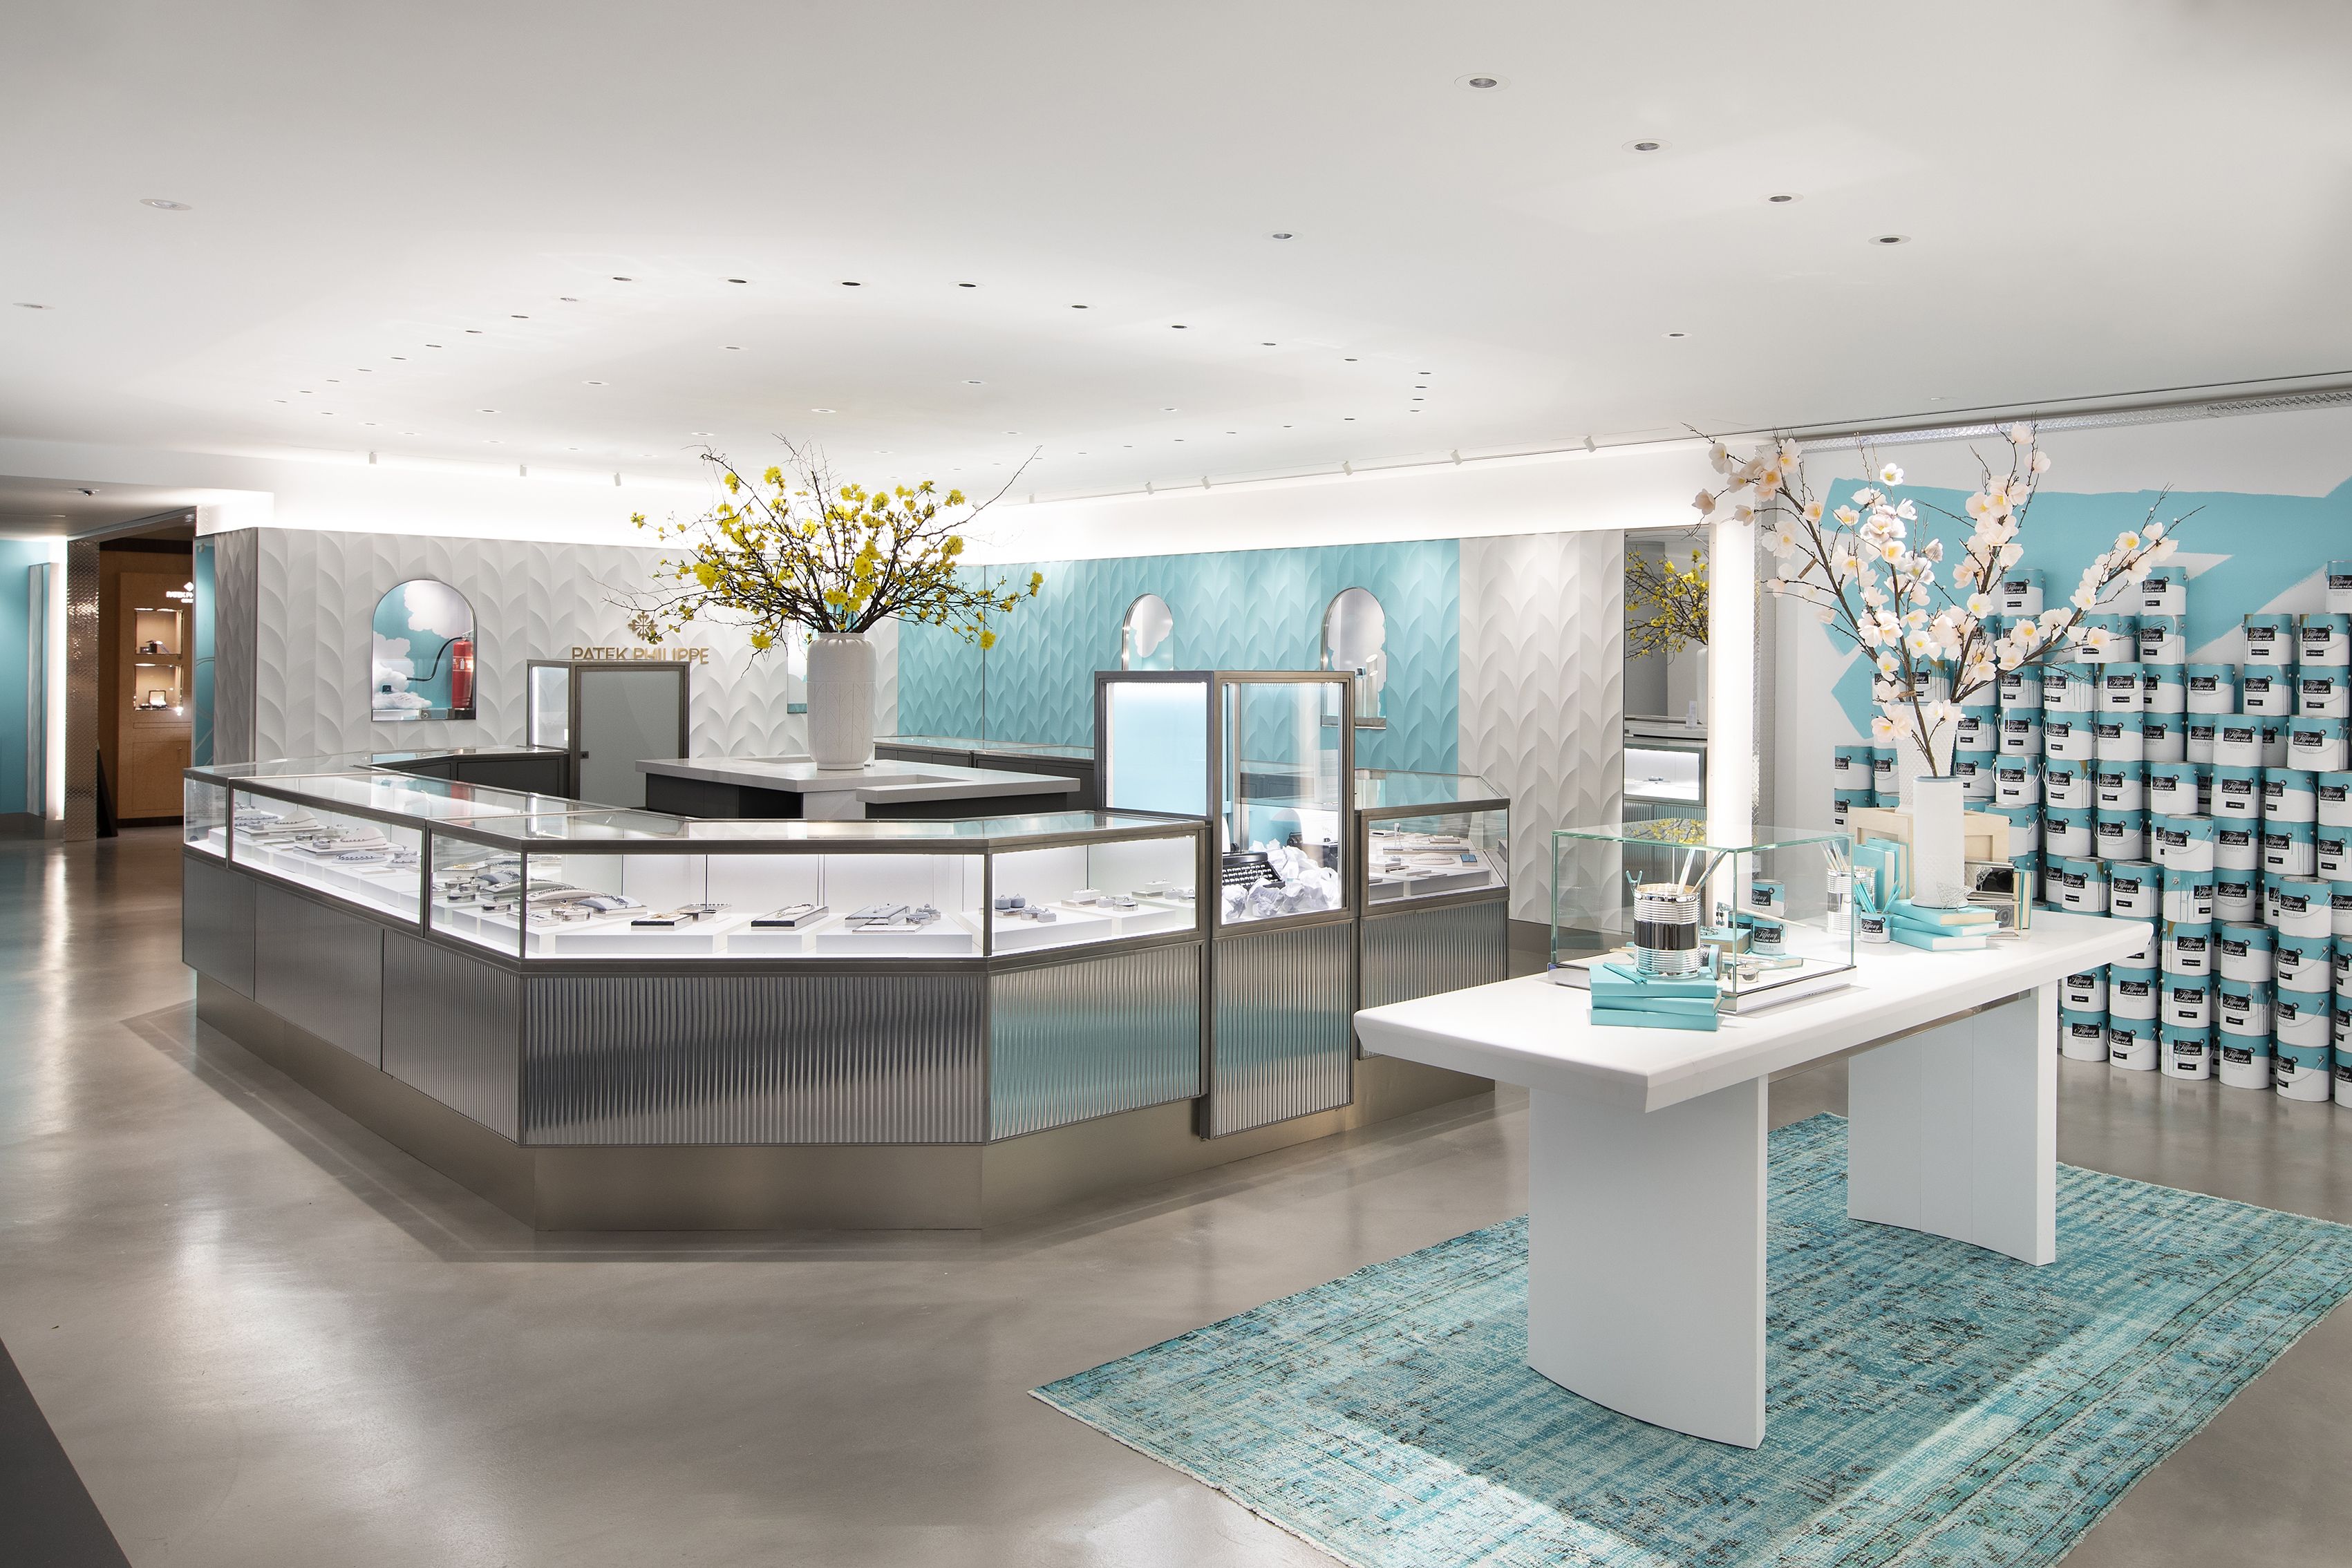 Inside Tiffany & Co.'s remarkable brand turnaround